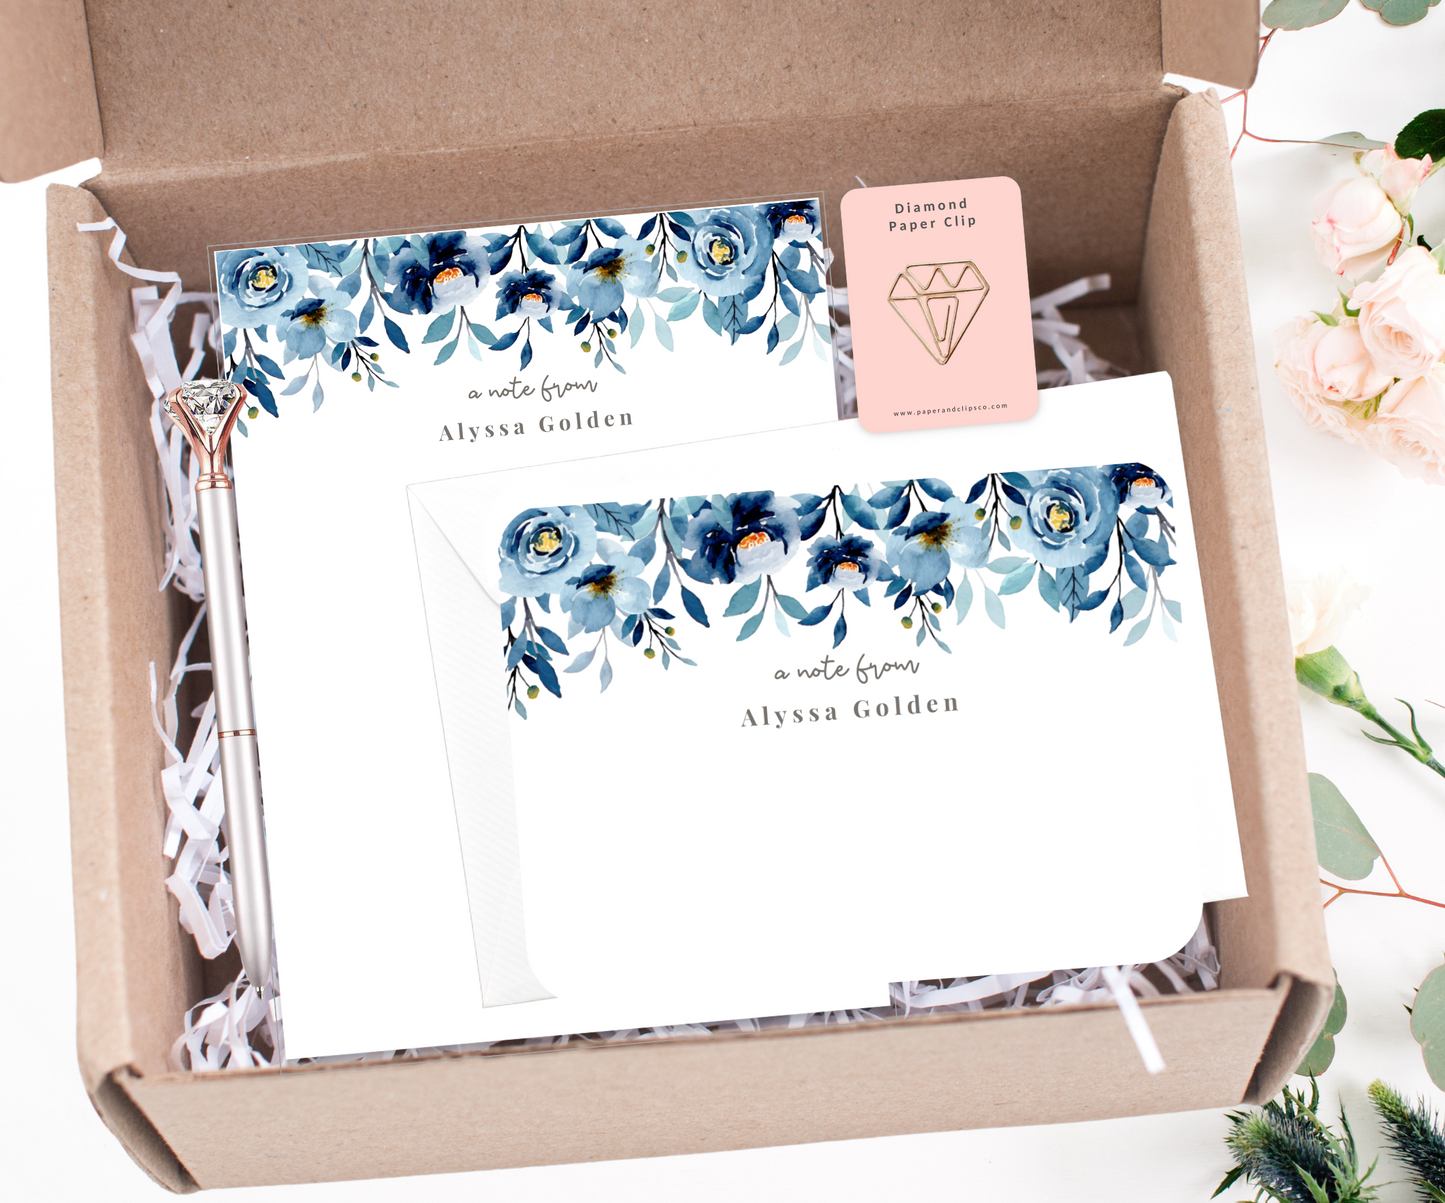 Personalized floral stationery gift set. Comes with a large floral notepad and a set of 12 floral notecards, diamond shaped paper clip and silver diamond pen. Put a smile on someone's face with this one of a kind gift set for any occasion.